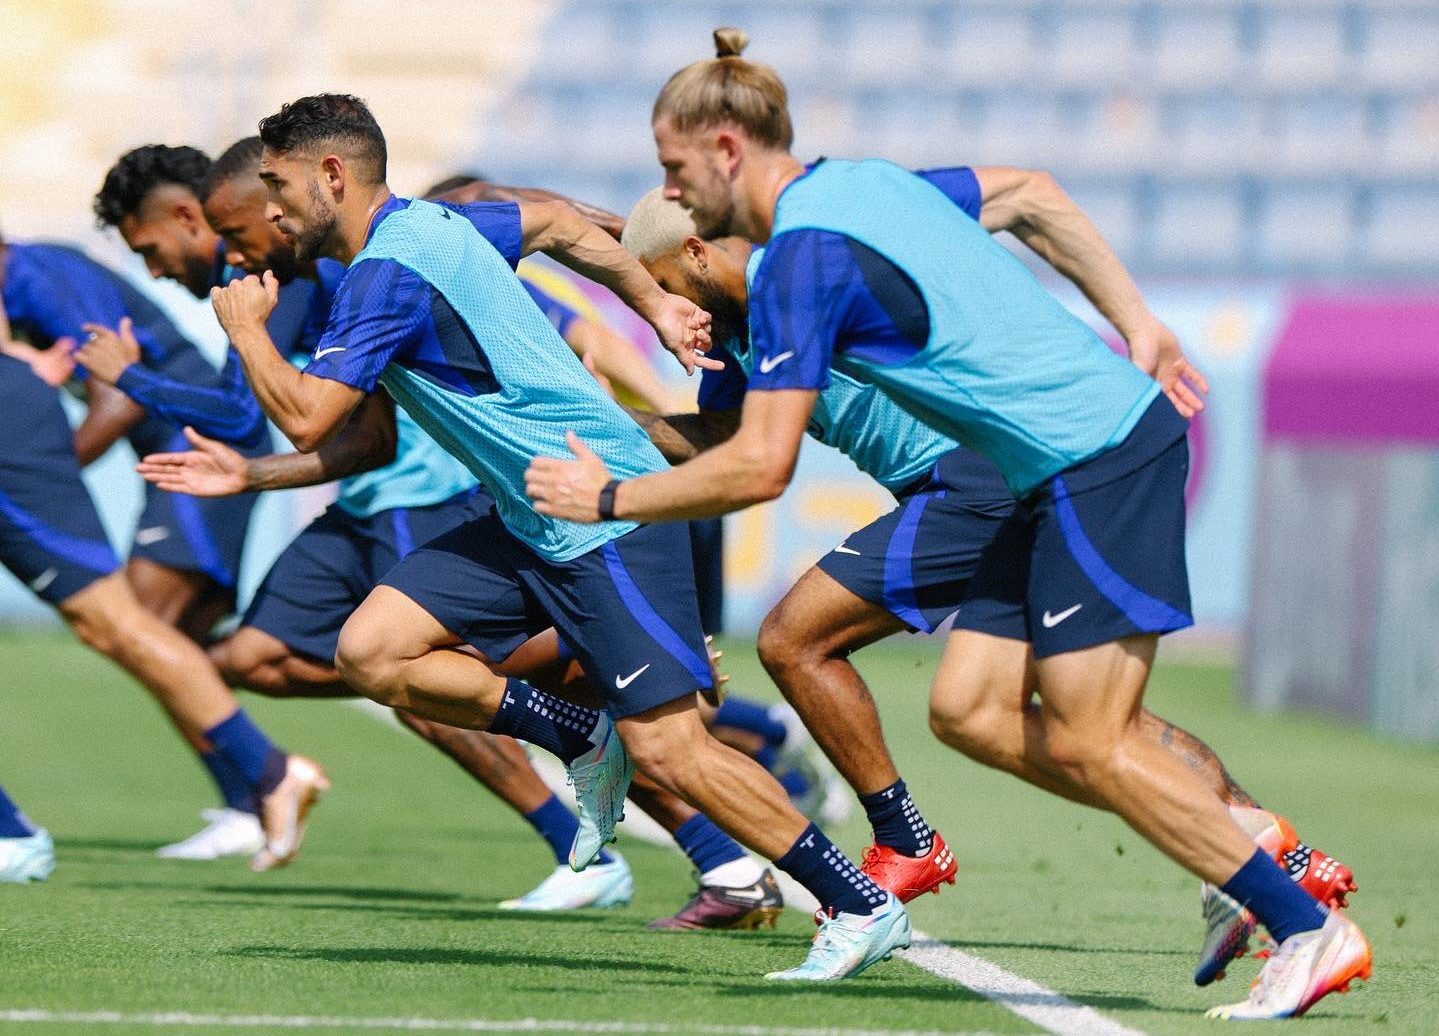 FIFA World Cup: USA becomes first team to arrive at Qatar, excitement grows as other teams set to arrive soon - Check Out